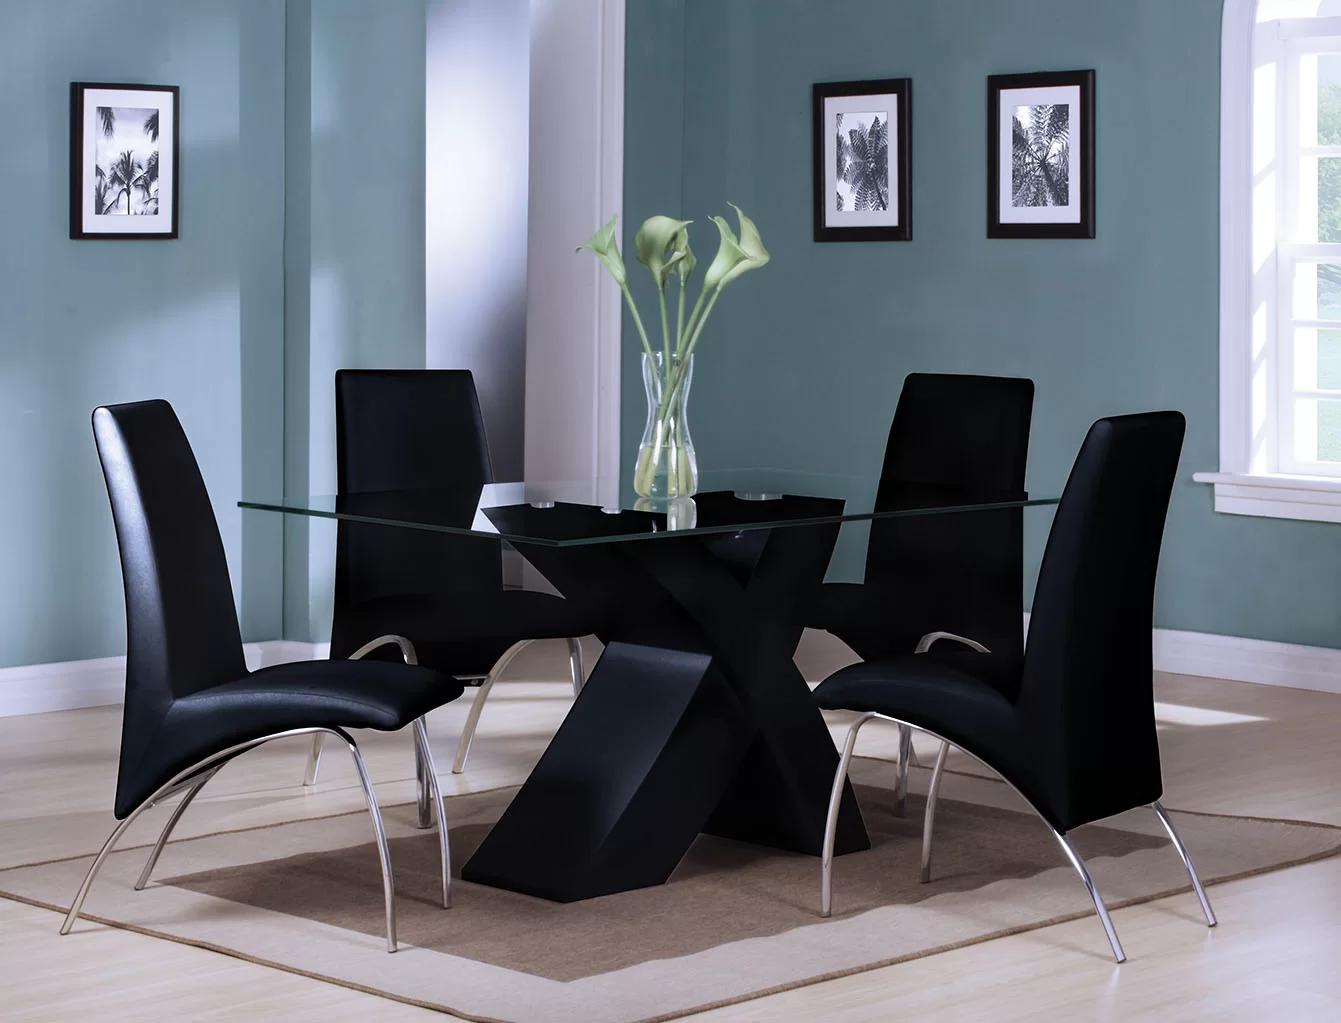 

    
Contemporary Black & Clear Glass Dining Table + 4x Chairs by Acme Pervis 71110-5pcs
